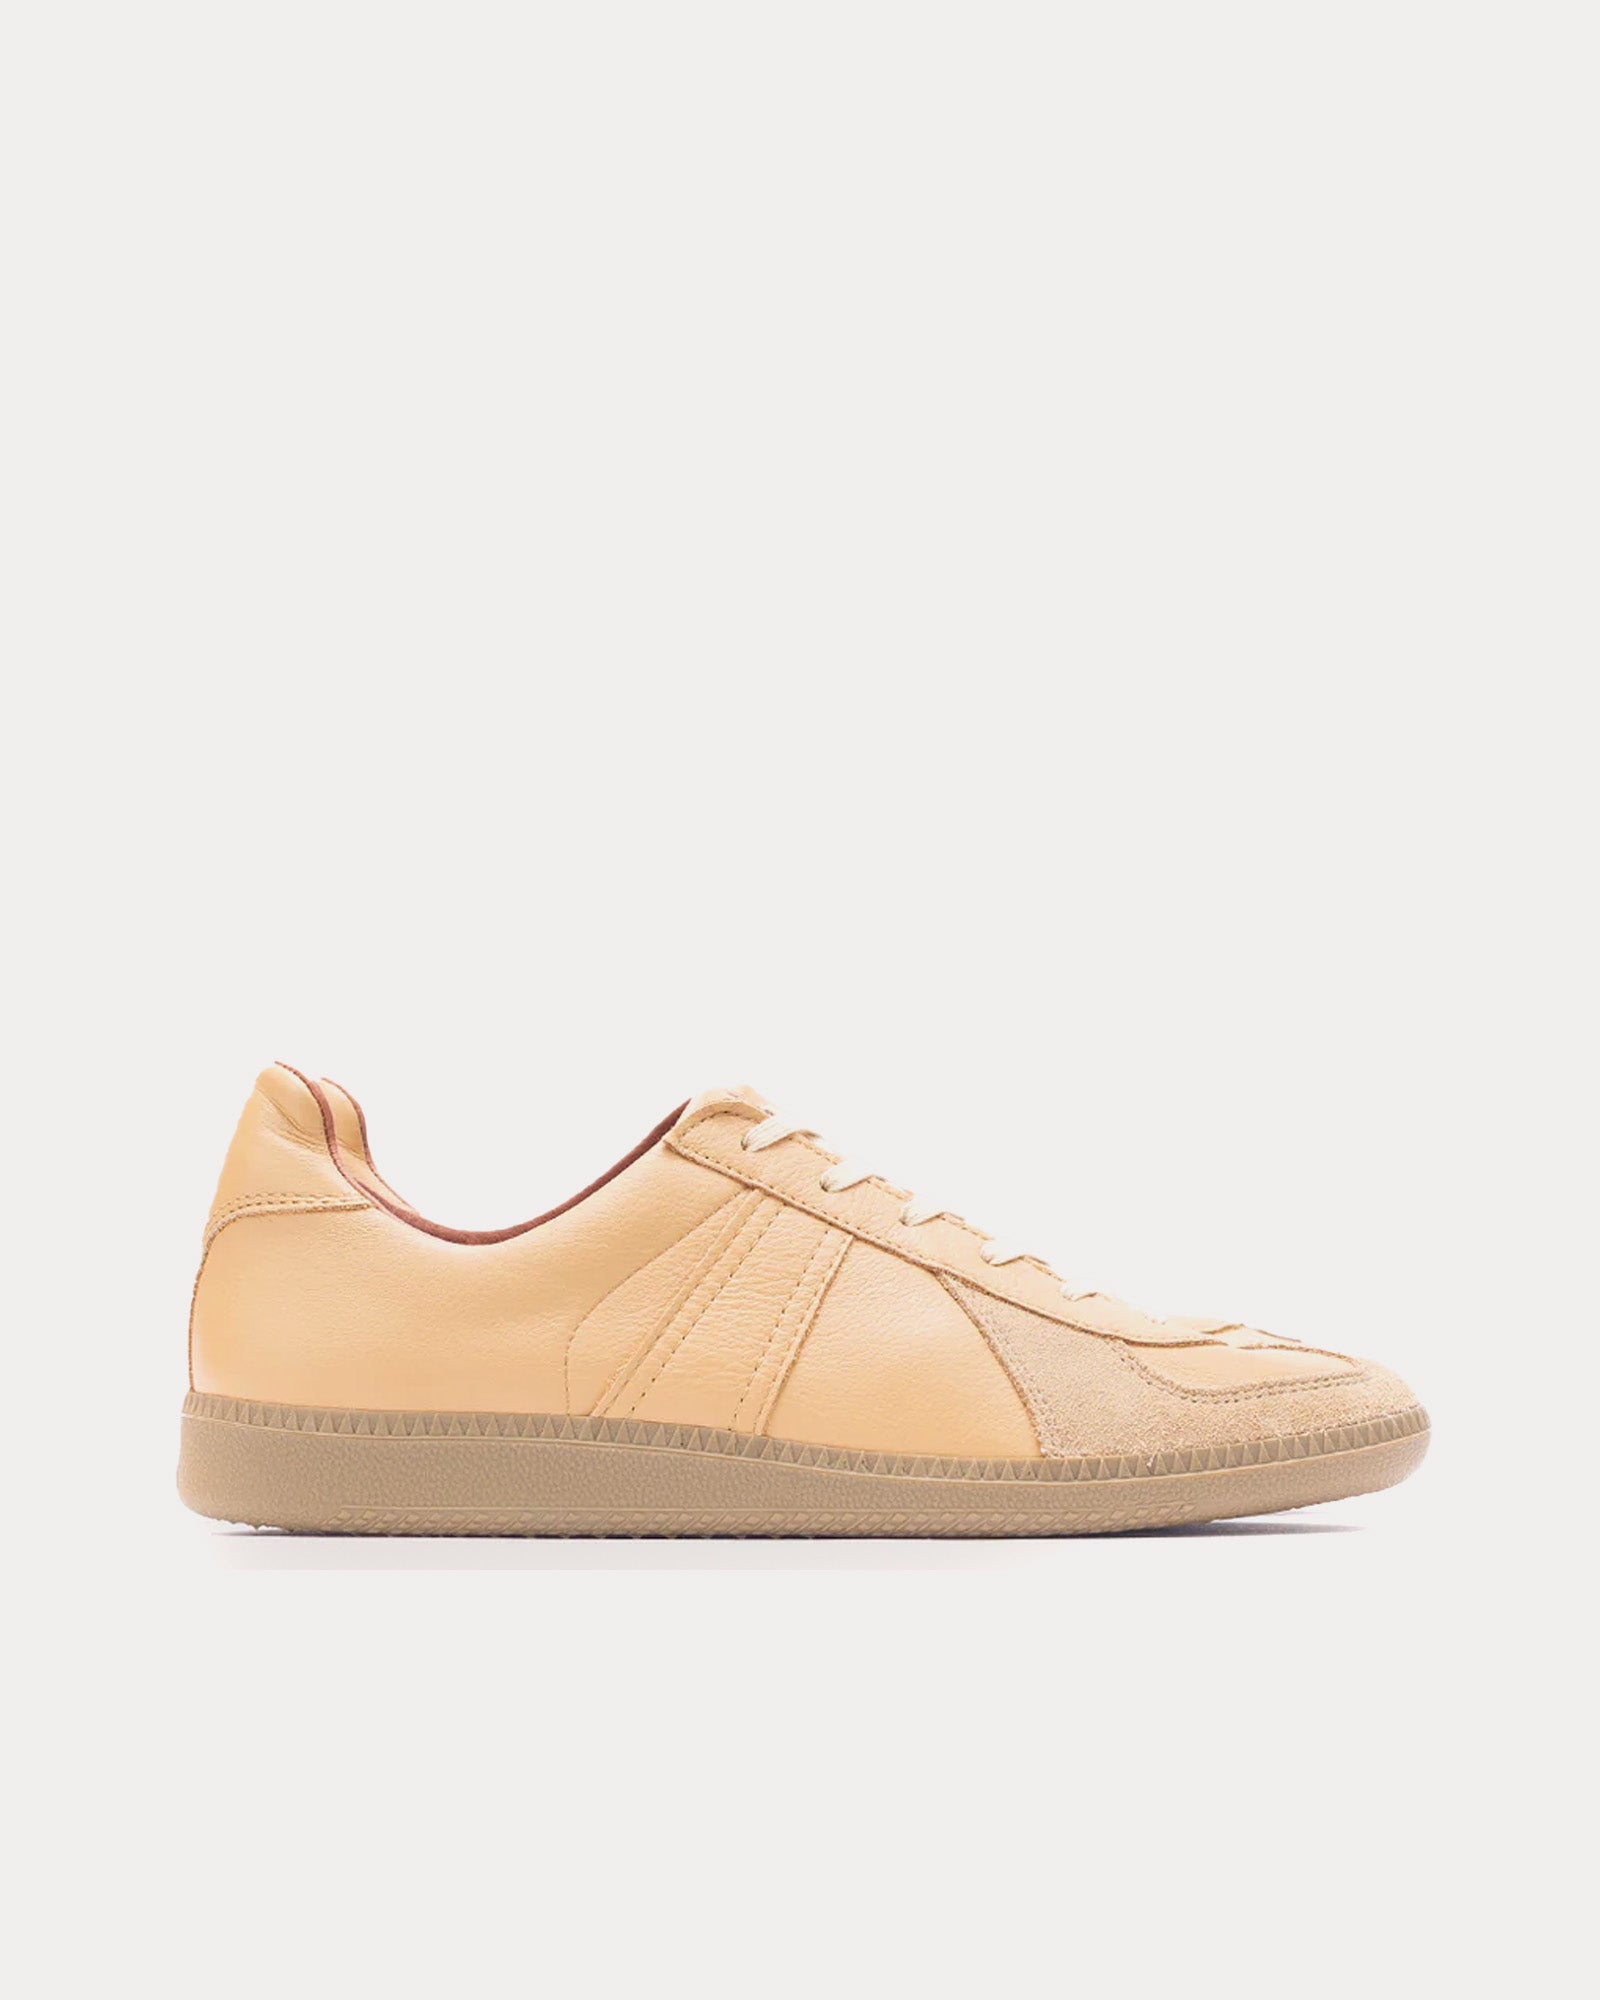 Reproduction of Found - German Army Trainer Light Beige Low Top Sneakers